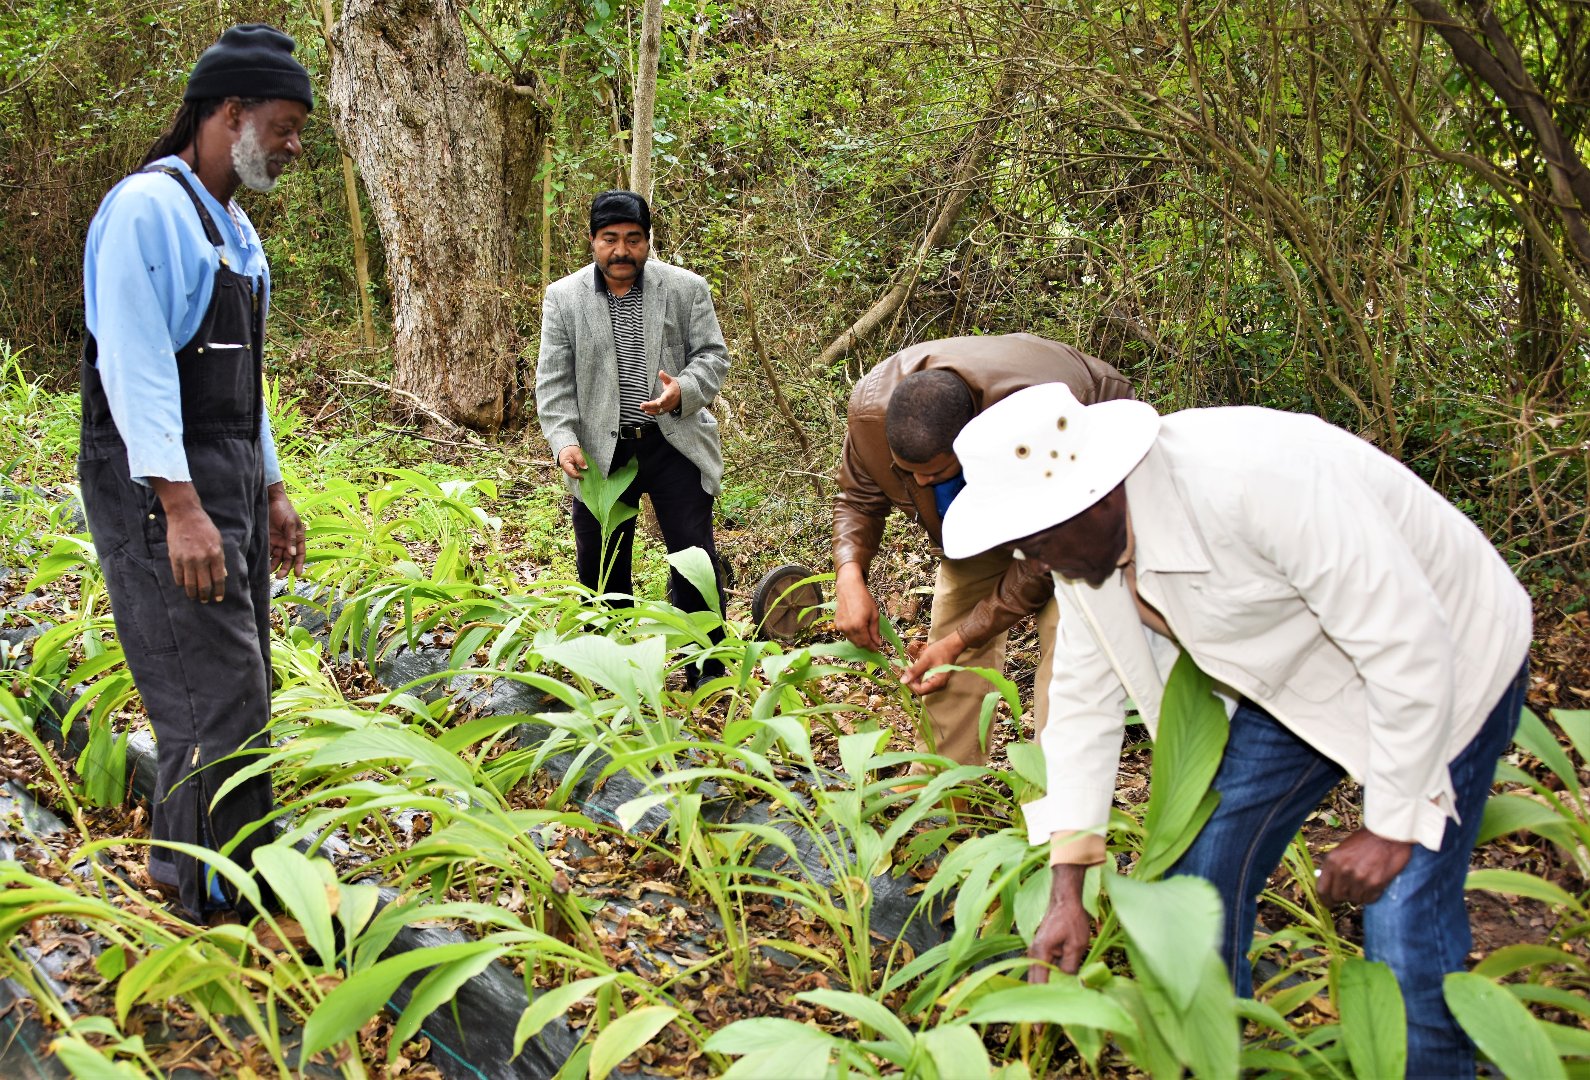 Drs. Bipul Biswas and Steven Samuels, Fort Valley State University researchers, examine the turmeric growing on Arthur Thomas’ (far left) farm in Milledgeville, Georgia, along with his friend, Wilkie Hill (far right).